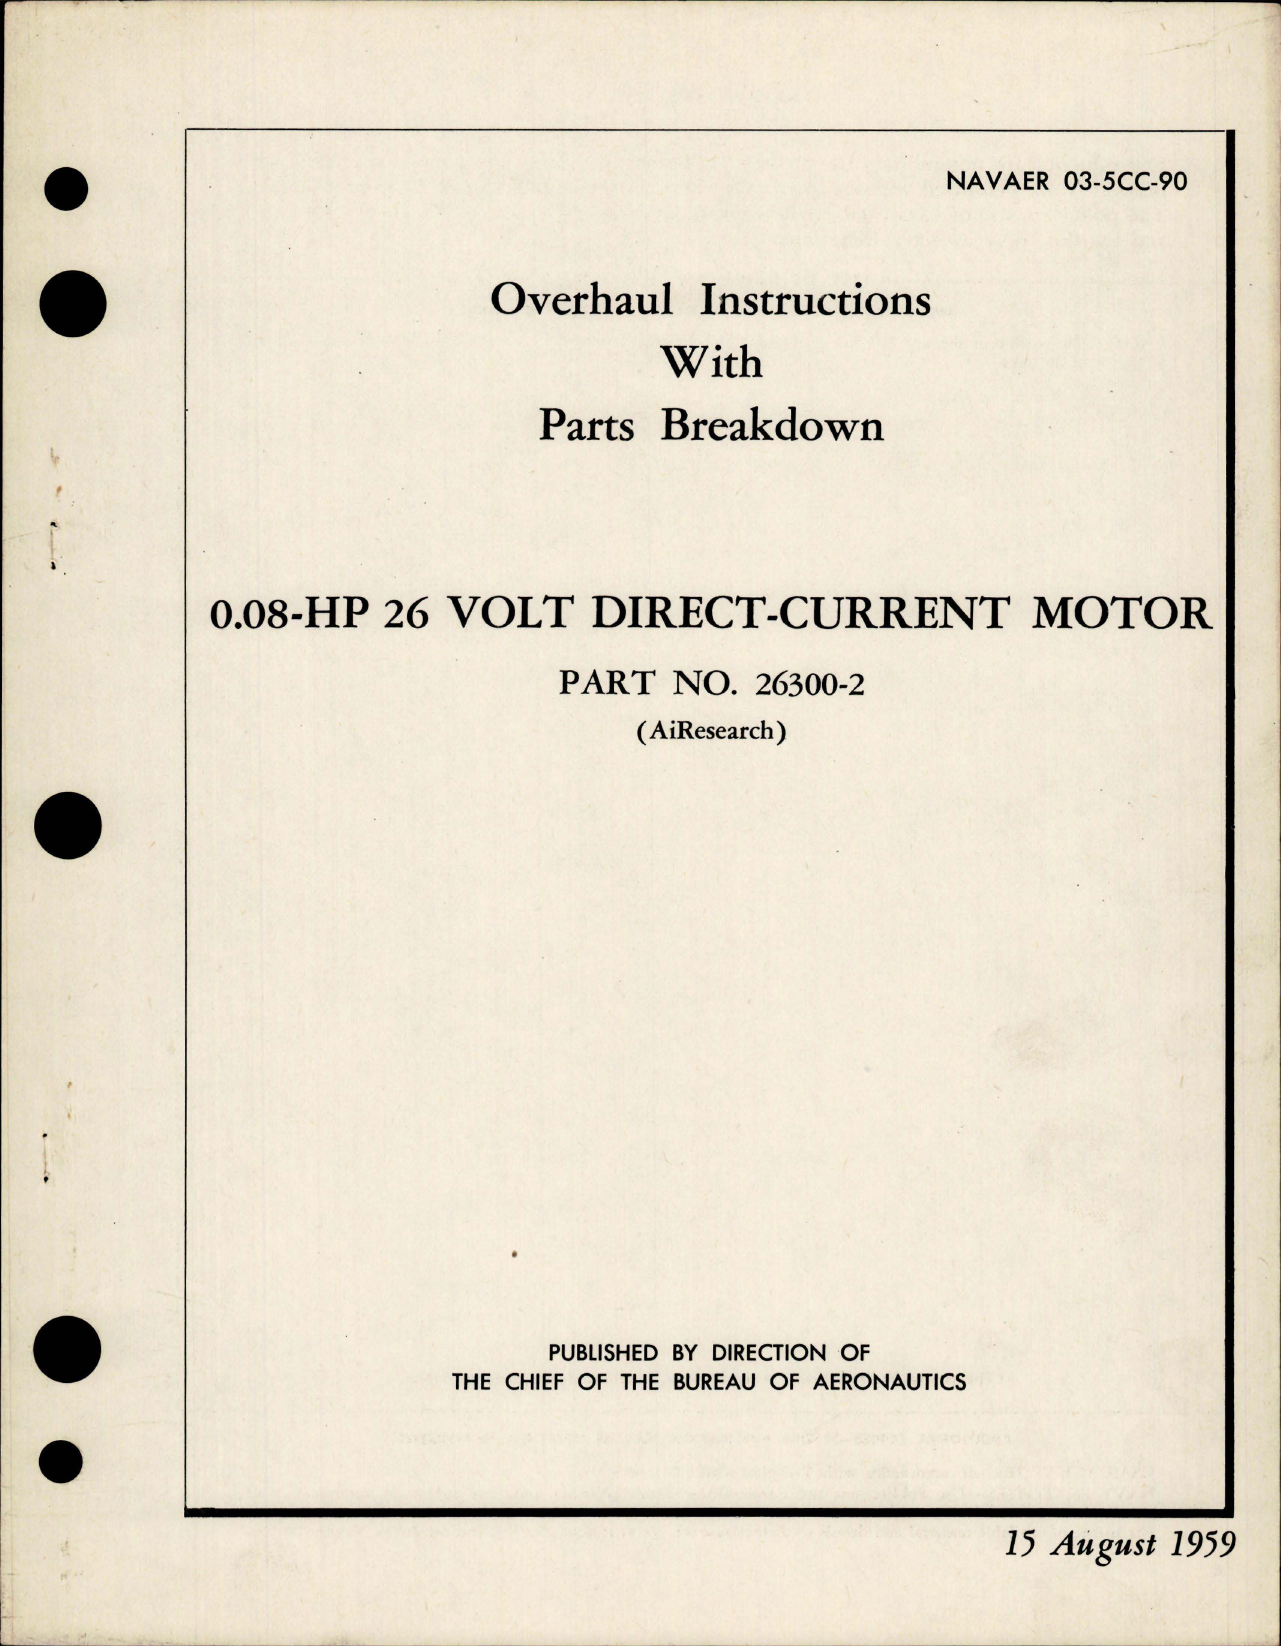 Sample page 1 from AirCorps Library document: Overhaul Instructions with Parts Breakdown for Direct Current Motor - 0.08HP 26 Volt - Part 26300-2 